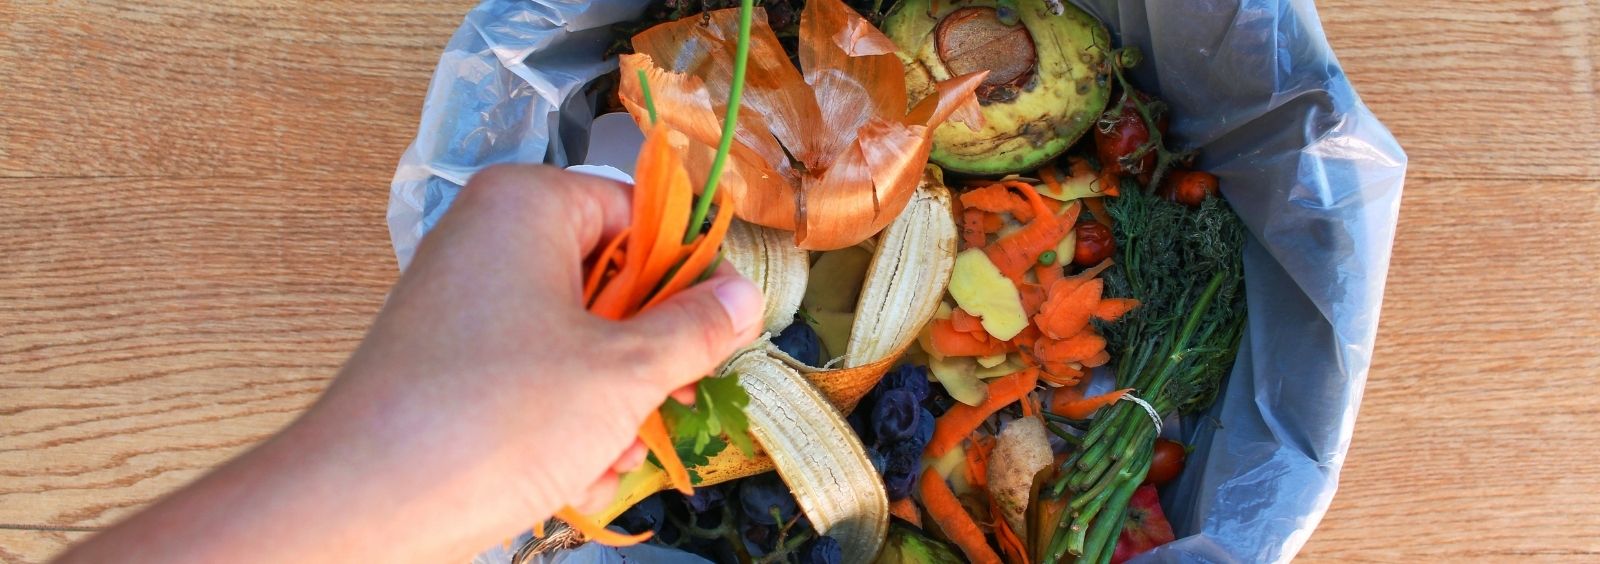 A person putting food waste in a bin.